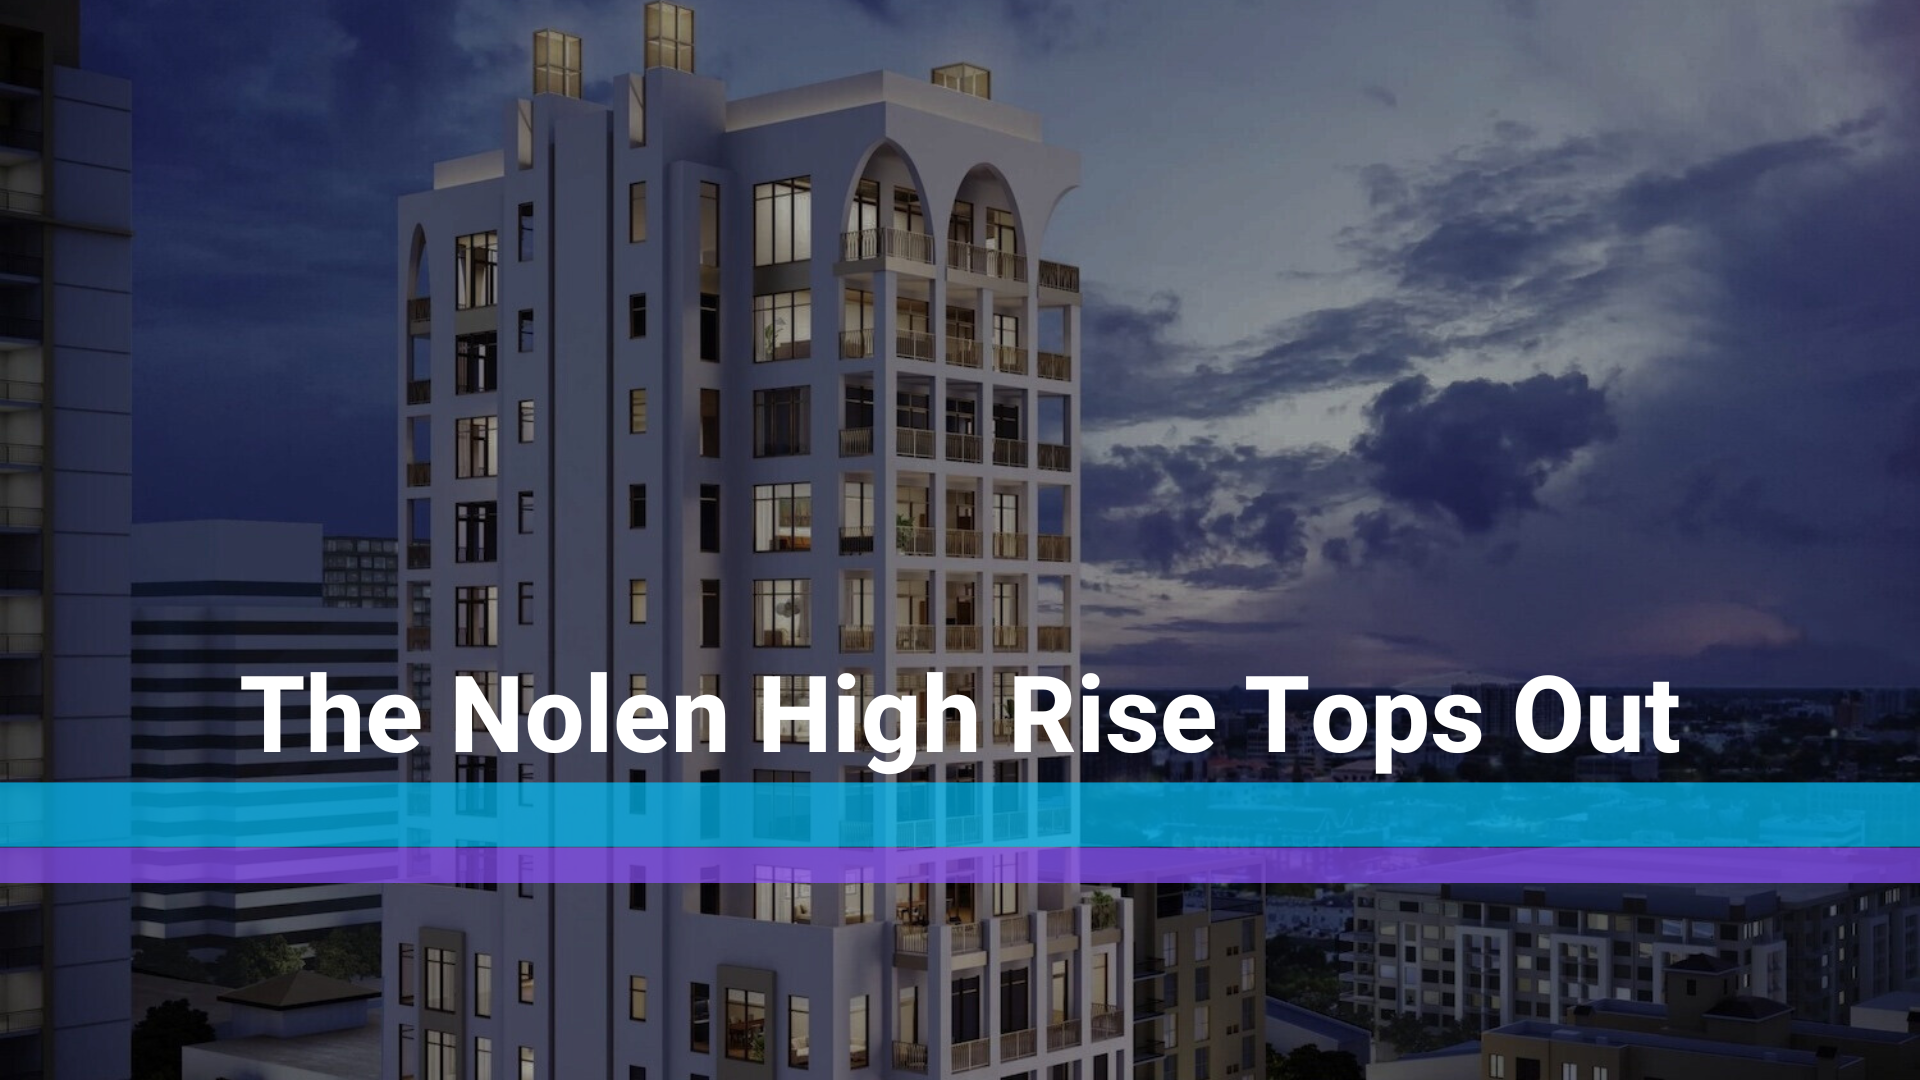 The Nolen High Rise Tops Out Cover Picture shows the top of the luxury high rise with Tampa Bay in the background